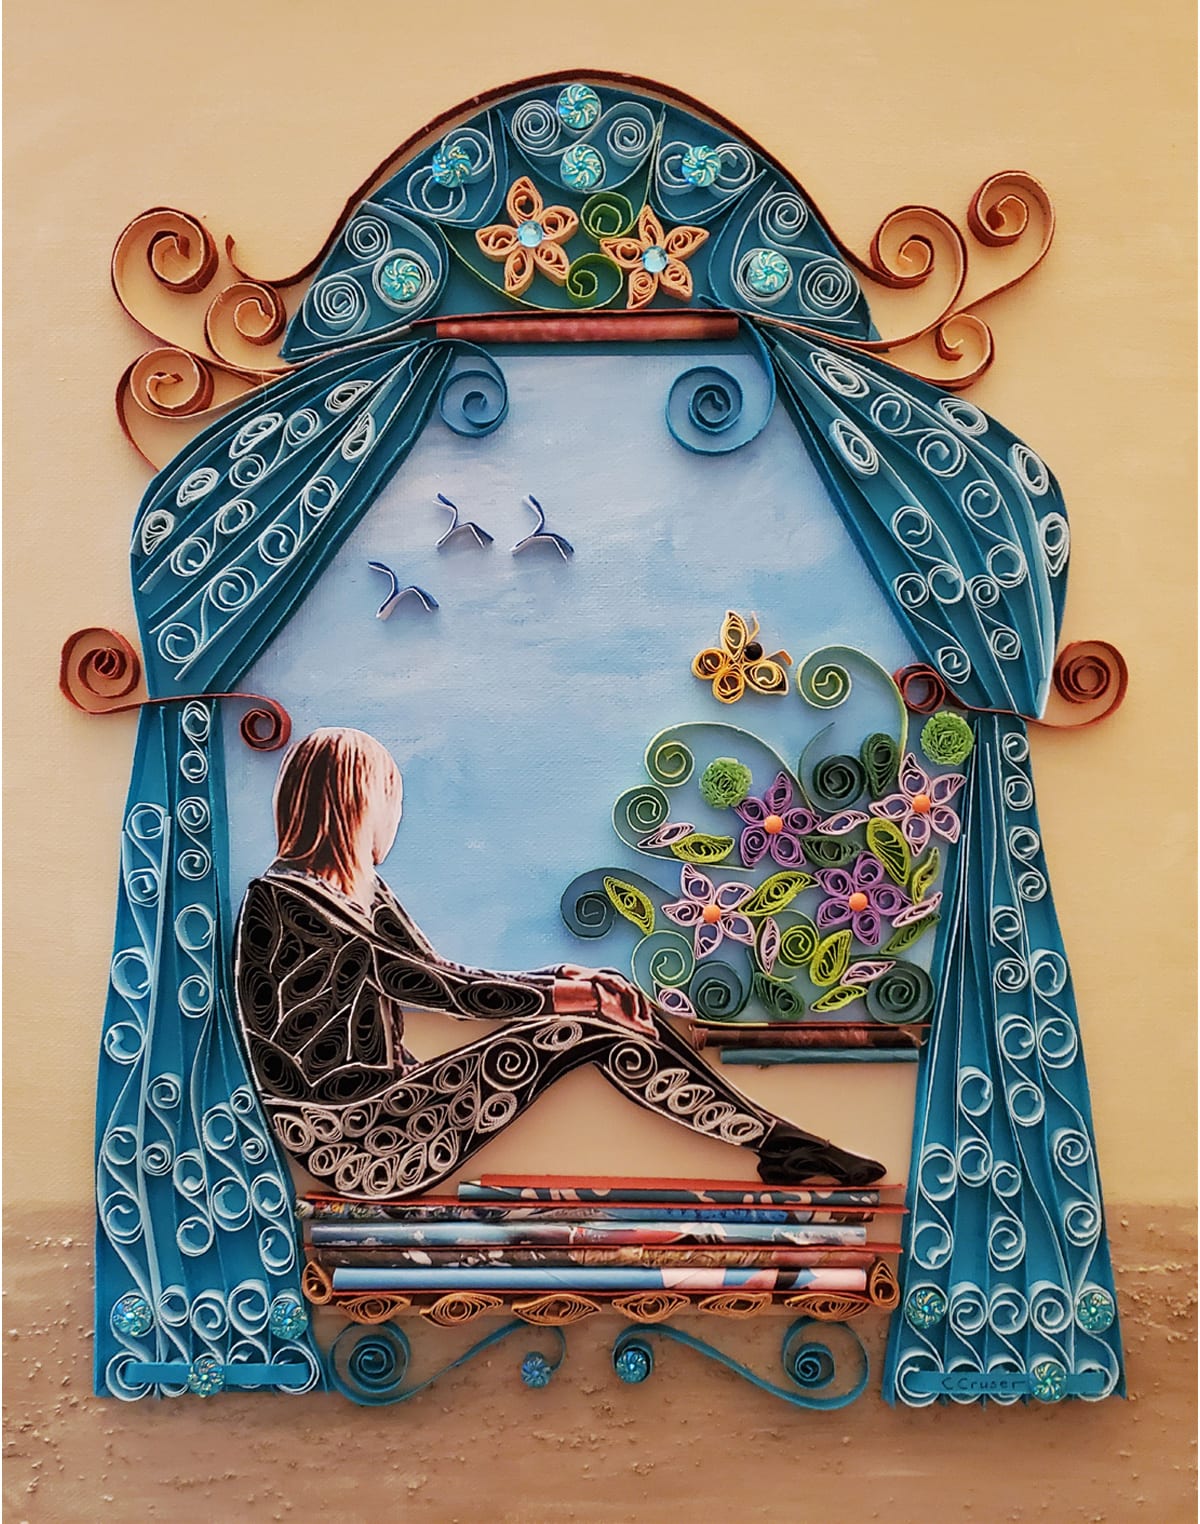 Connie Cruser, Silent Morning, paper quilled artwork on an acrylic painted background, 16 x 20 inches